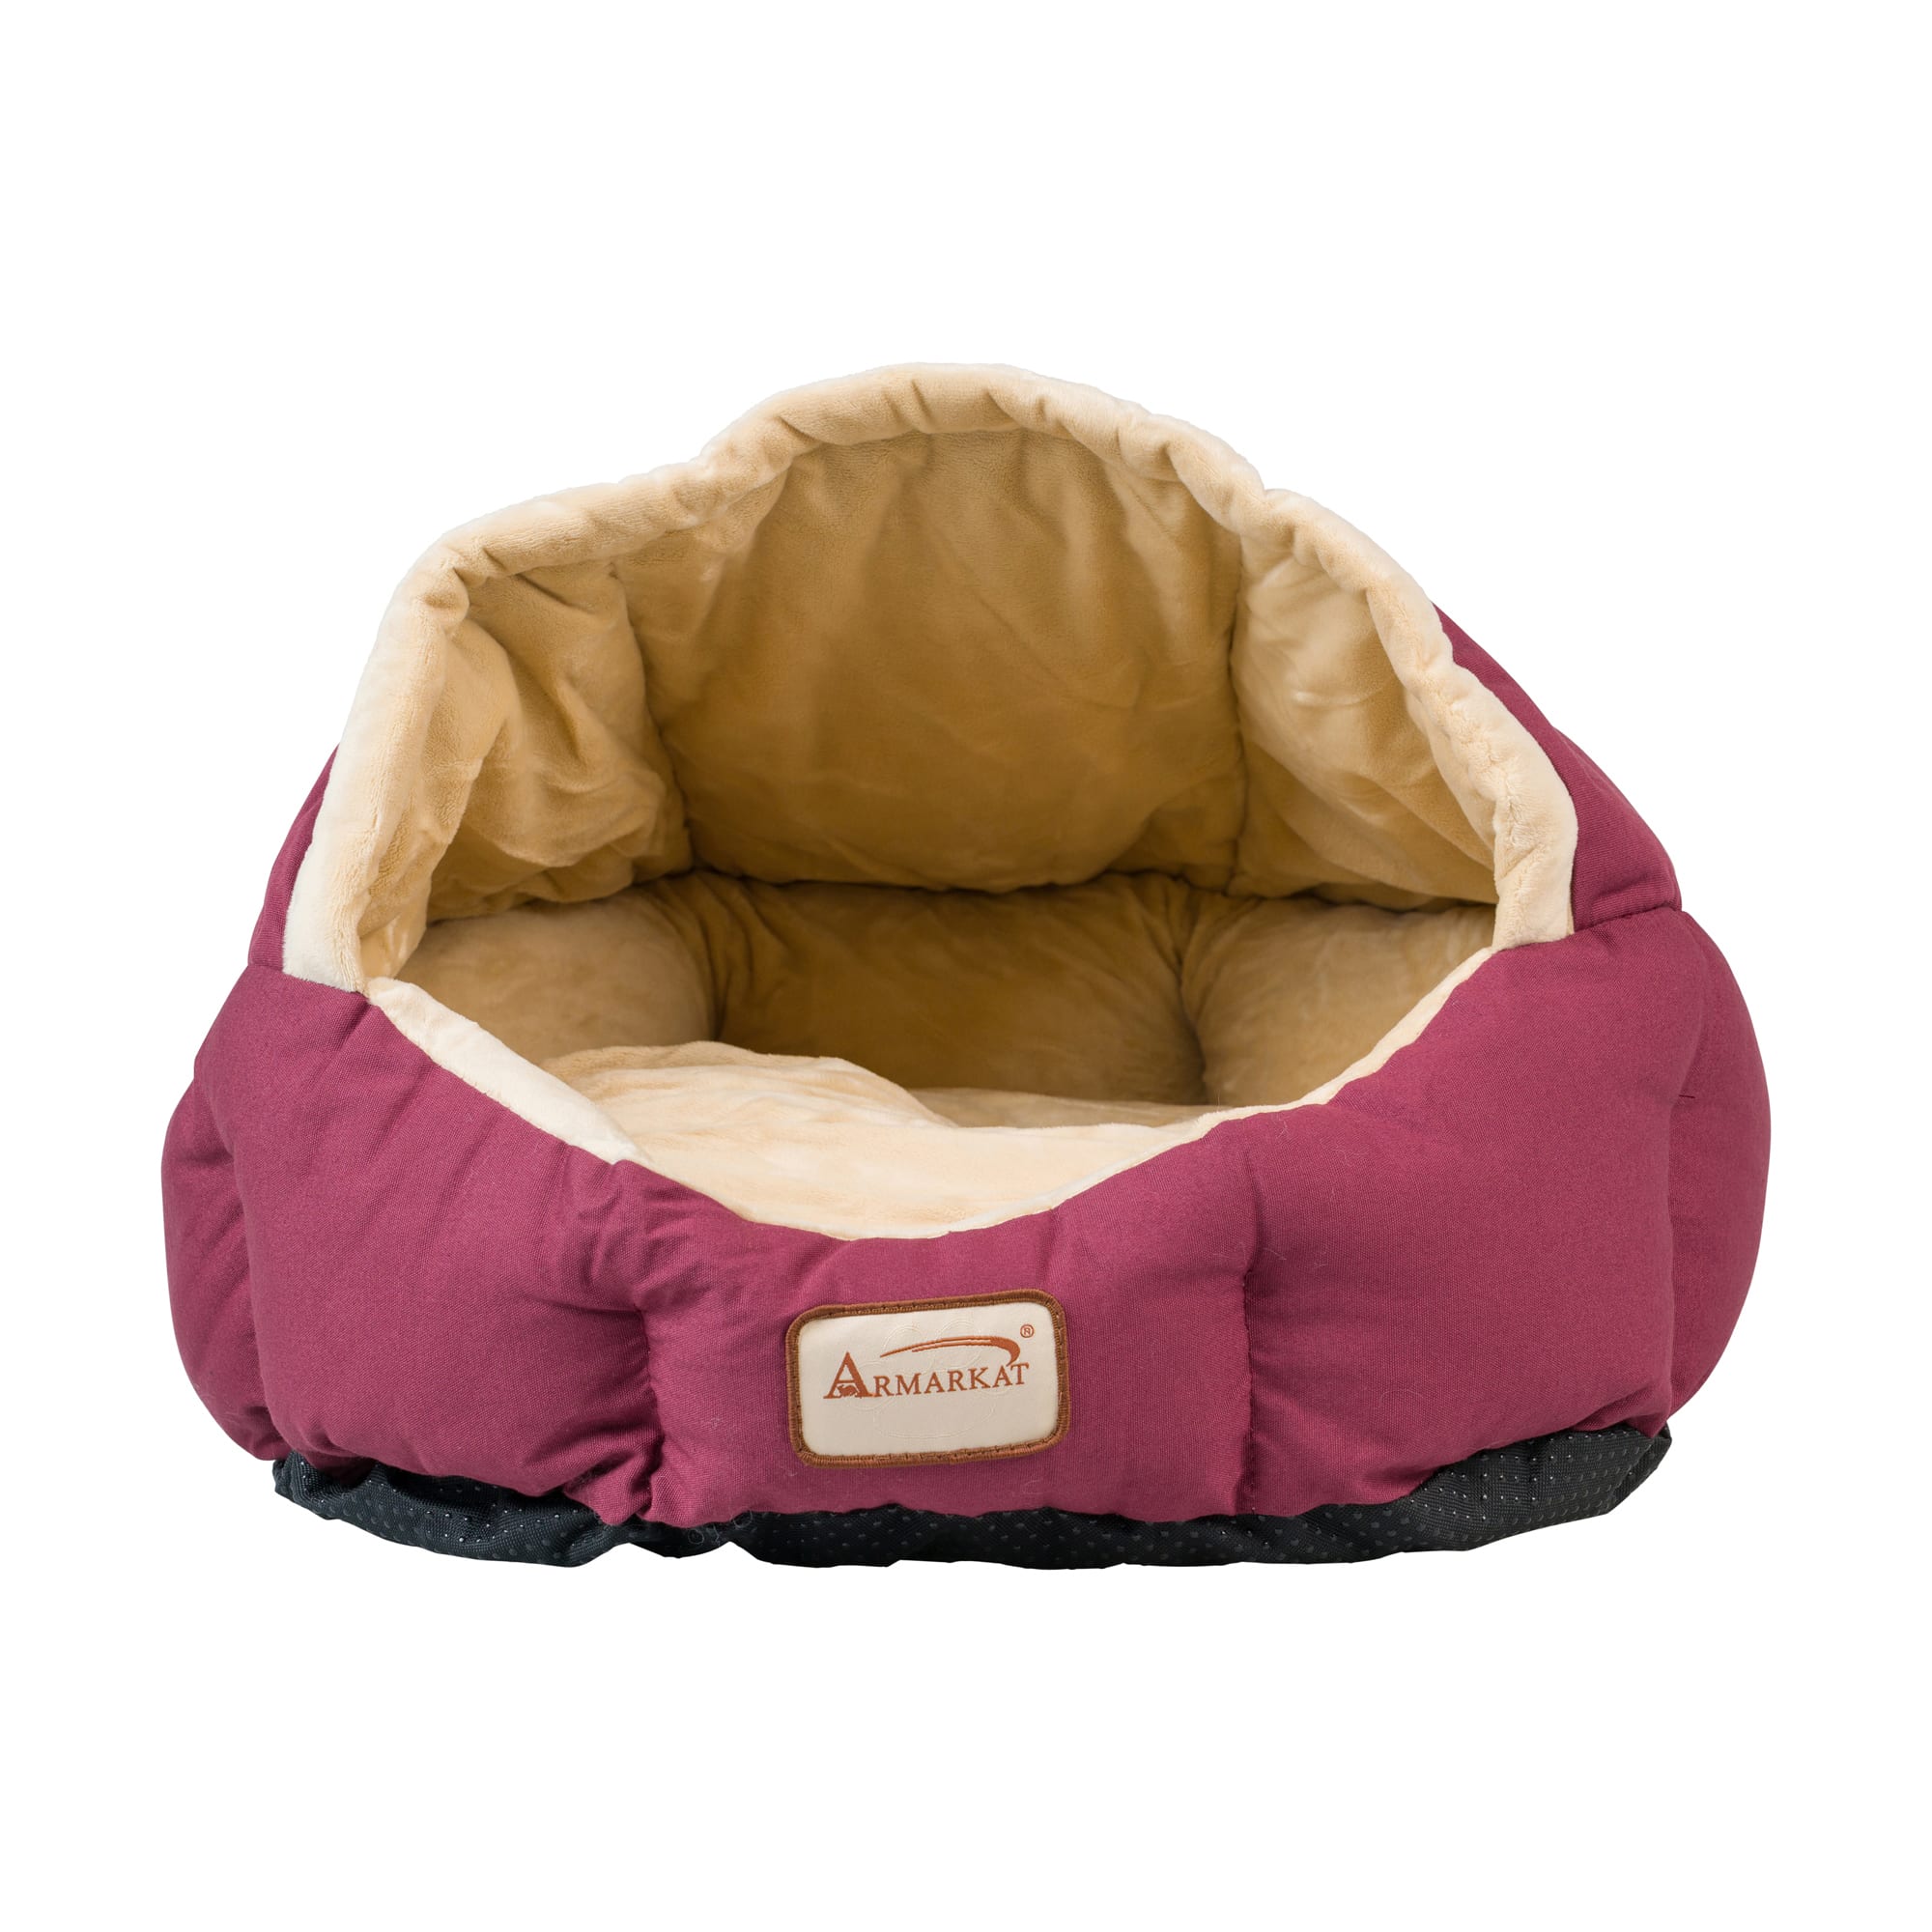 Photos - Cat Bed / House Armarkat Burgundy/Ivory Pet Bed, 18" L X 14" W X 11" H, Small, Bu 